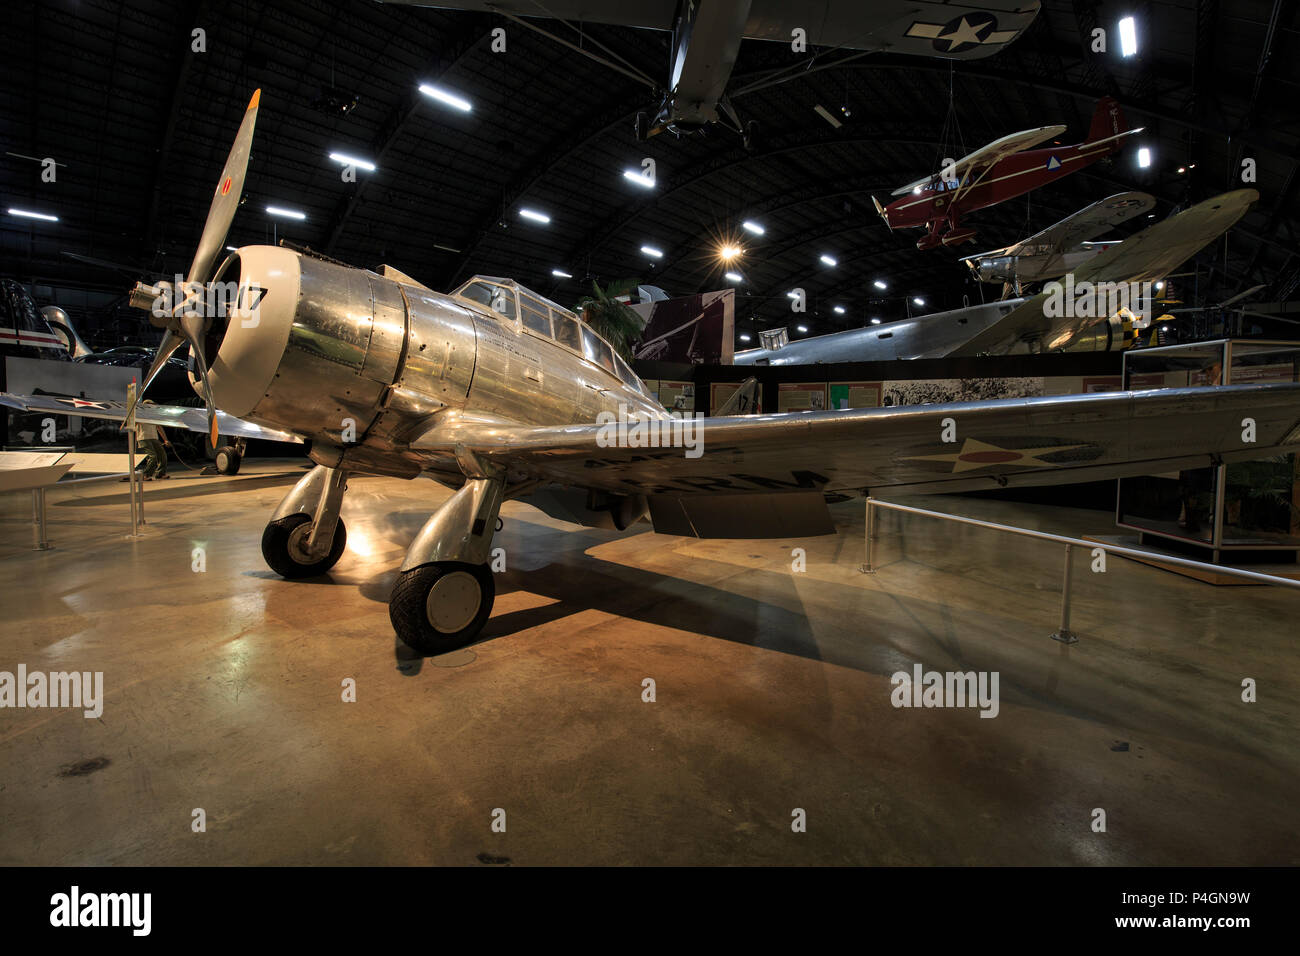 Seversky P-35 airplane at the National Museum of the U.S. Air Force Stock Photo